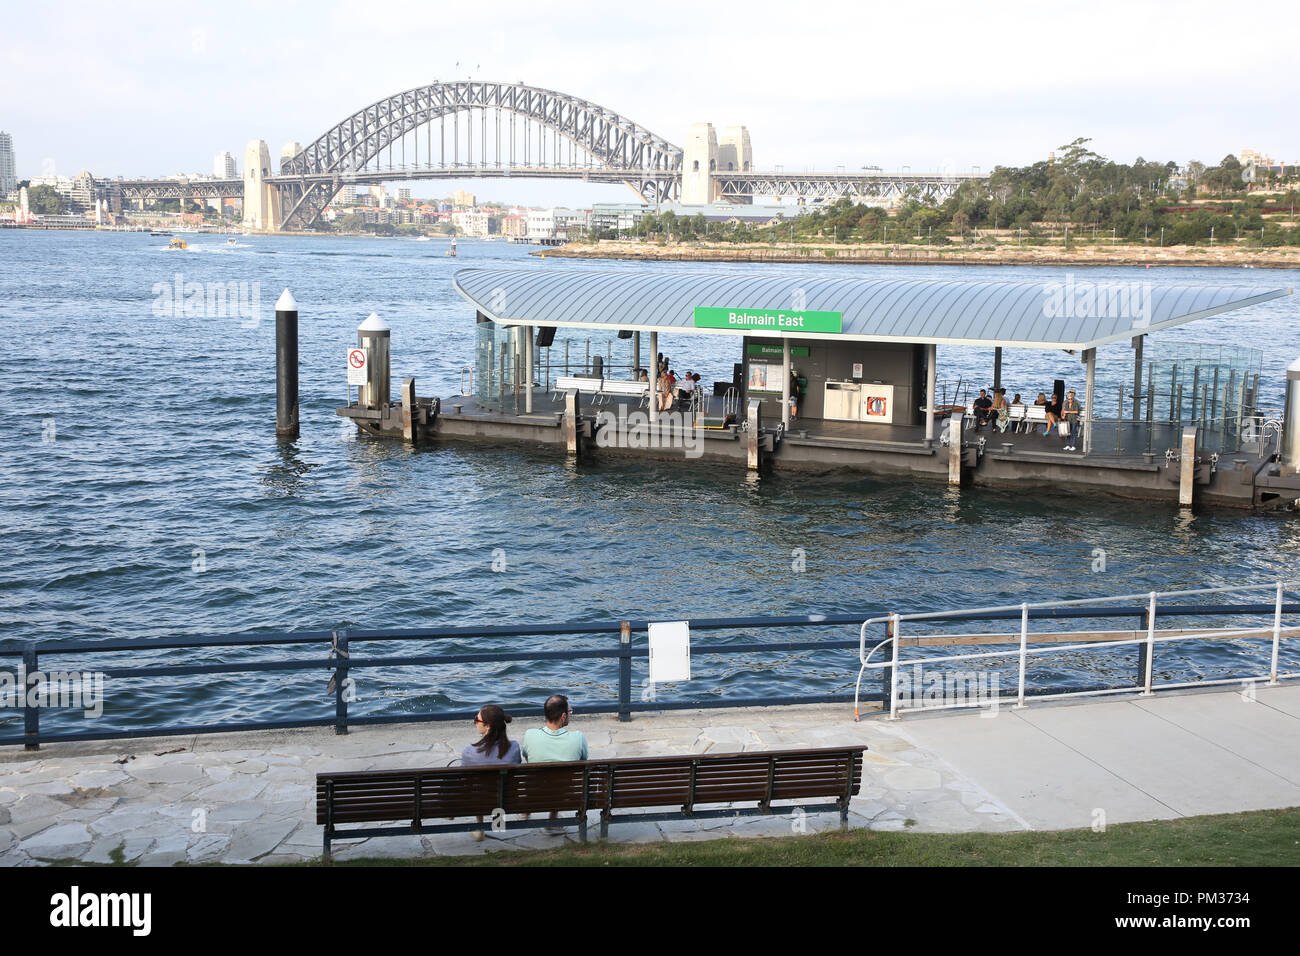 Balmain East ferry wharf with the Sydney Harbour Bridge in the background  Stock Photo - Alamy